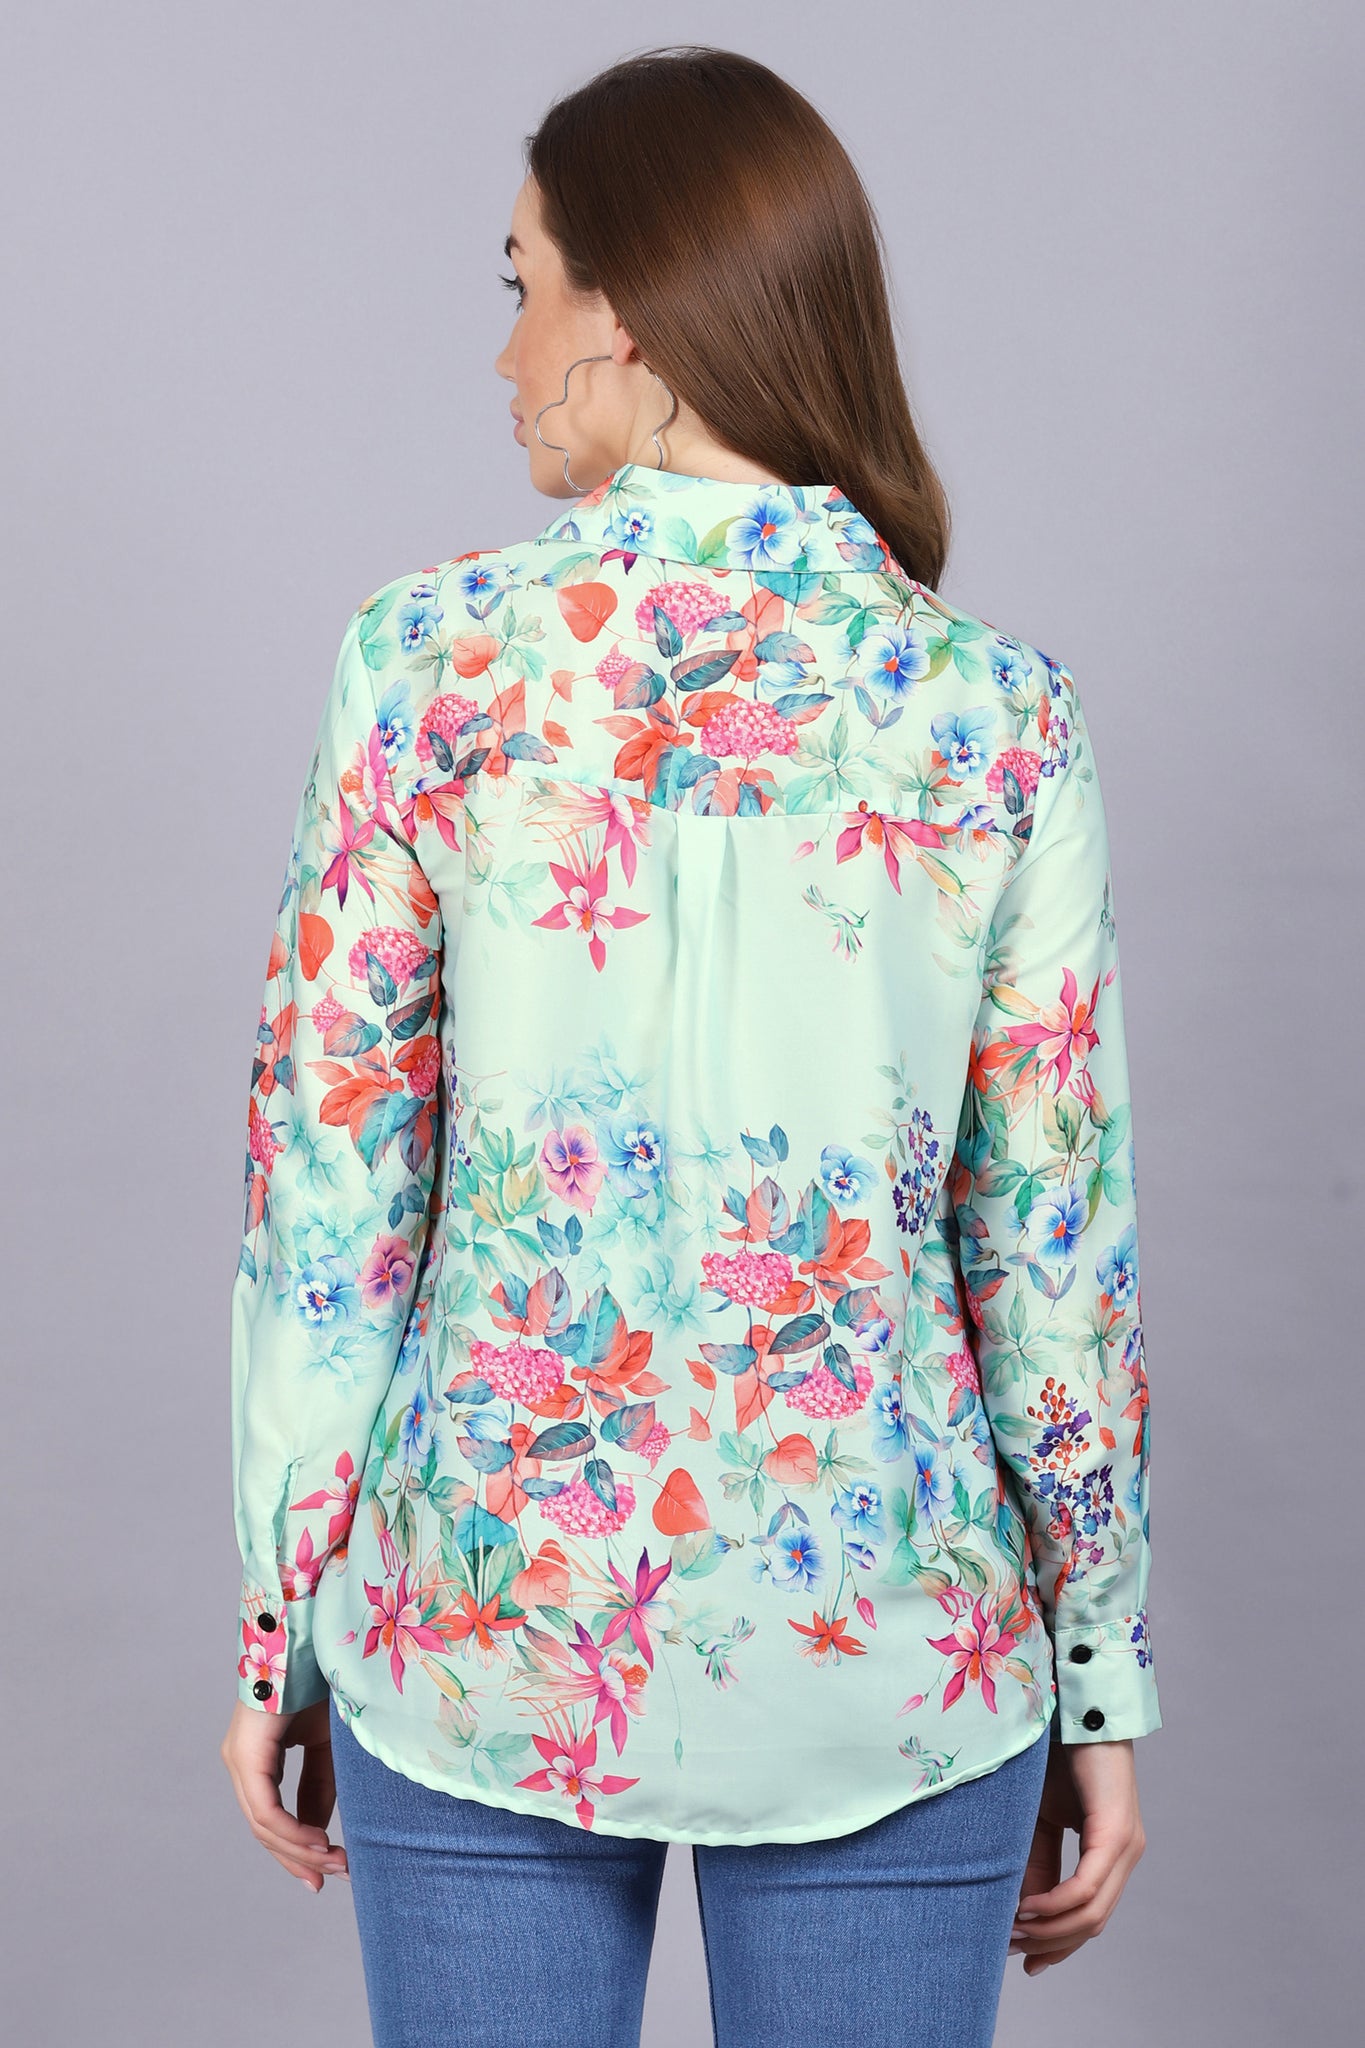 Flossy Floral Shirt For Women